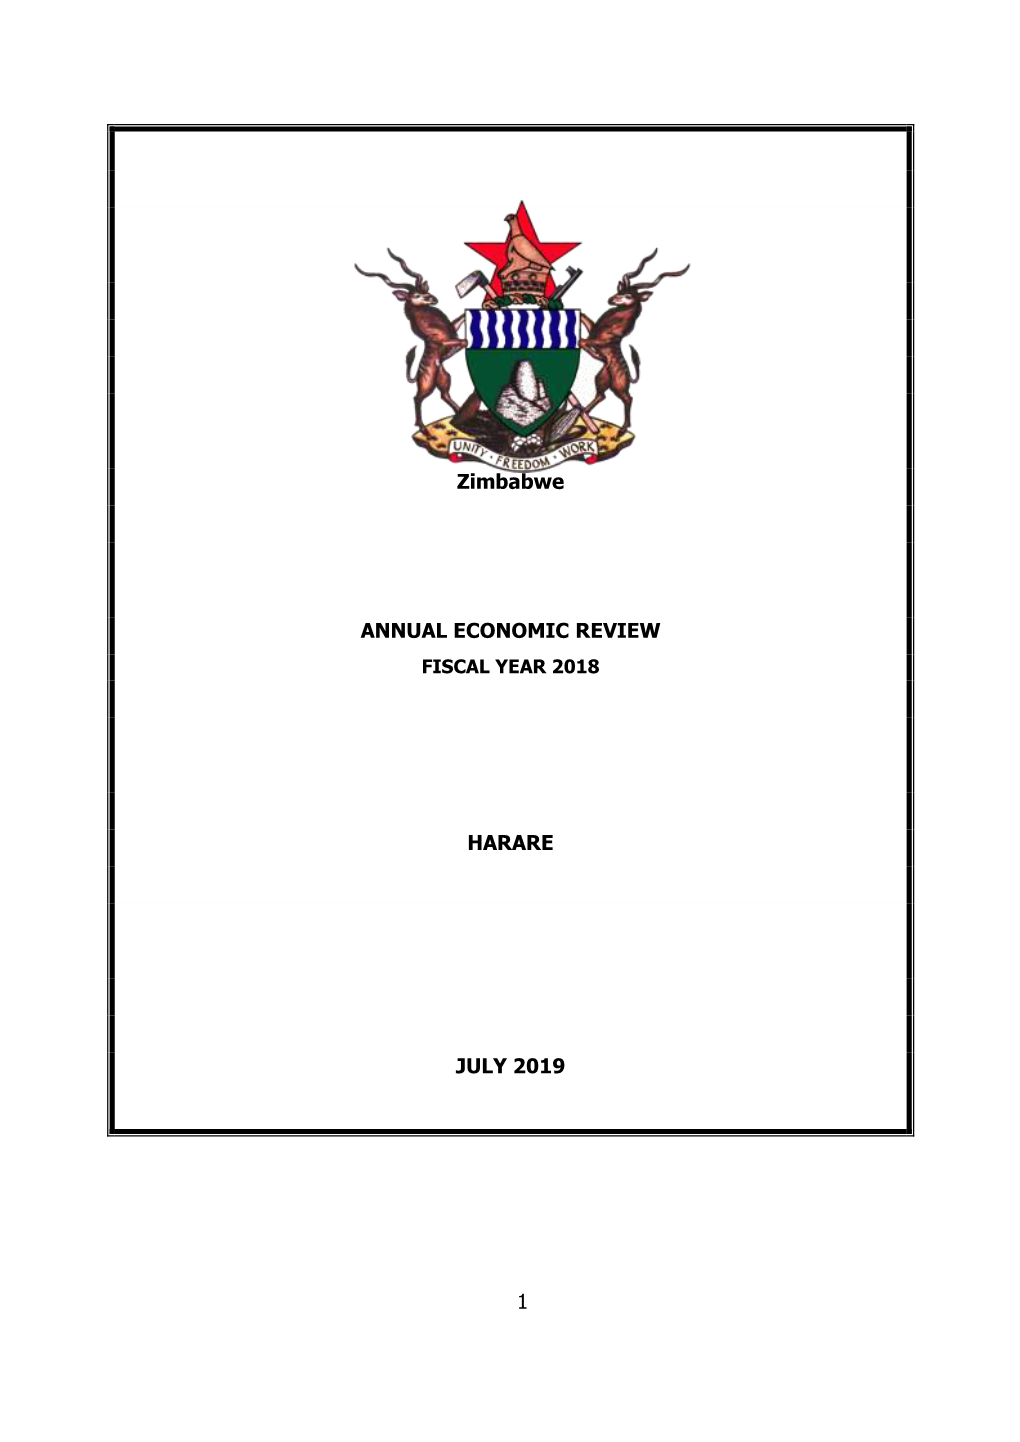 1 Zimbabwe ANNUAL ECONOMIC REVIEW HARARE JULY 2019